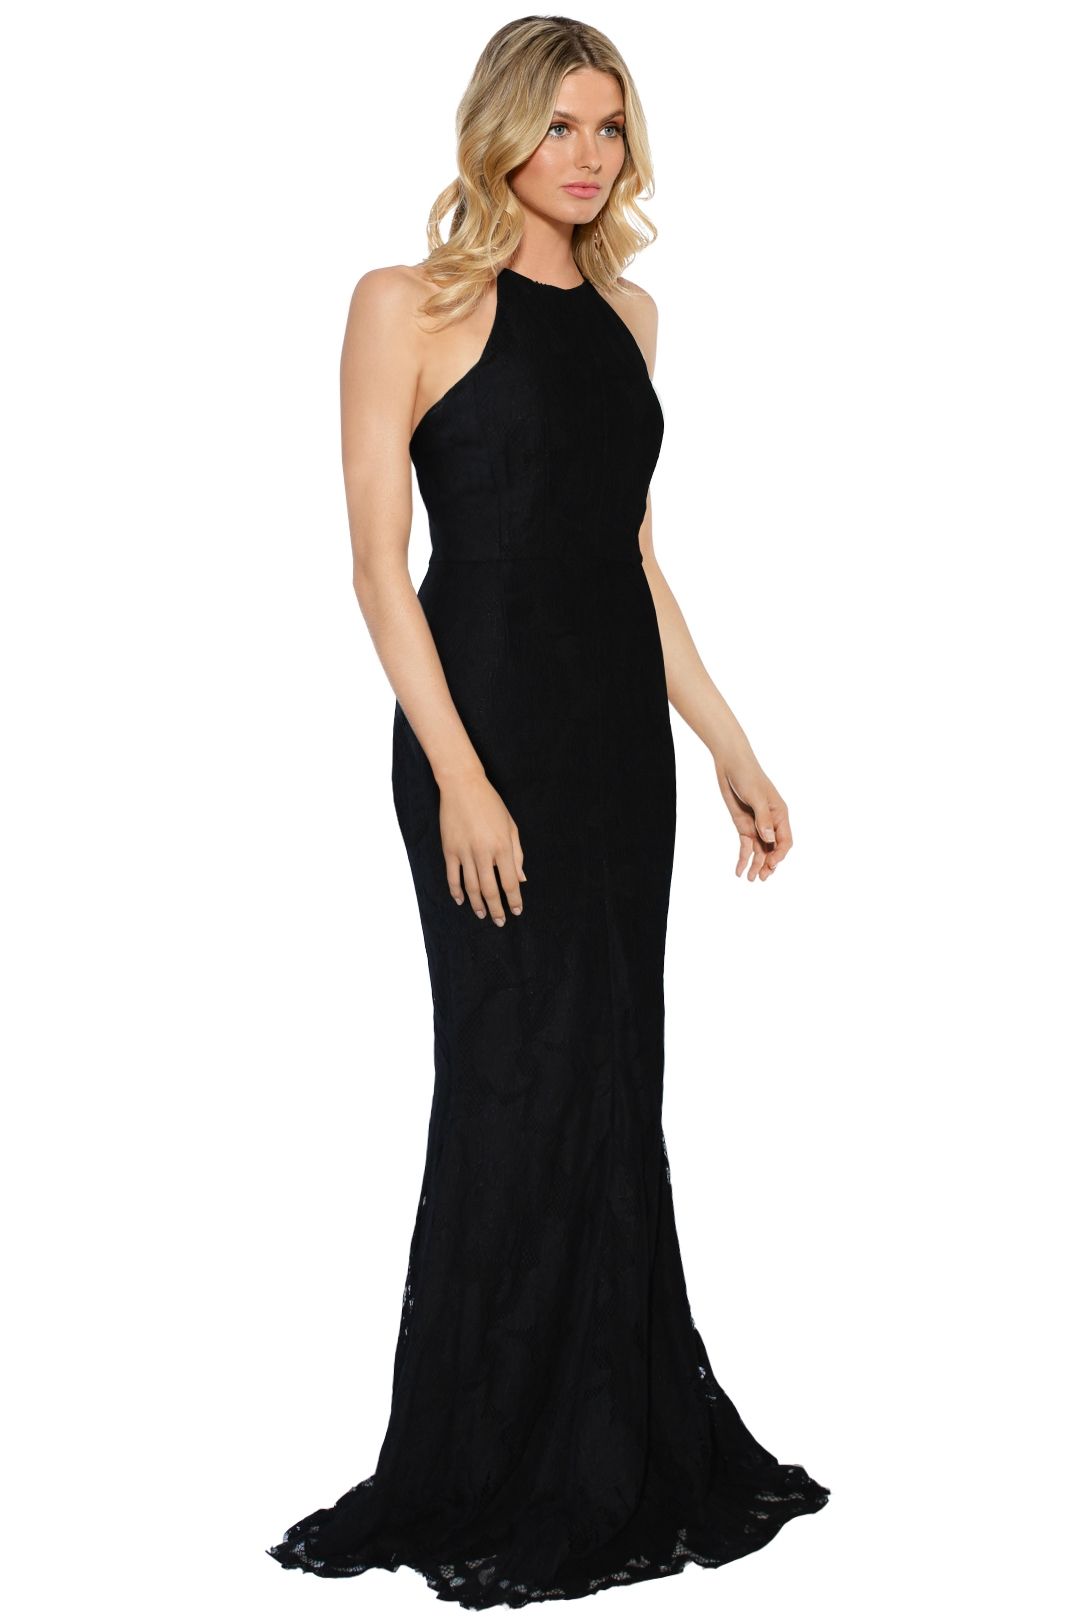 Grace and Hart - Allure Gown - Black - Side